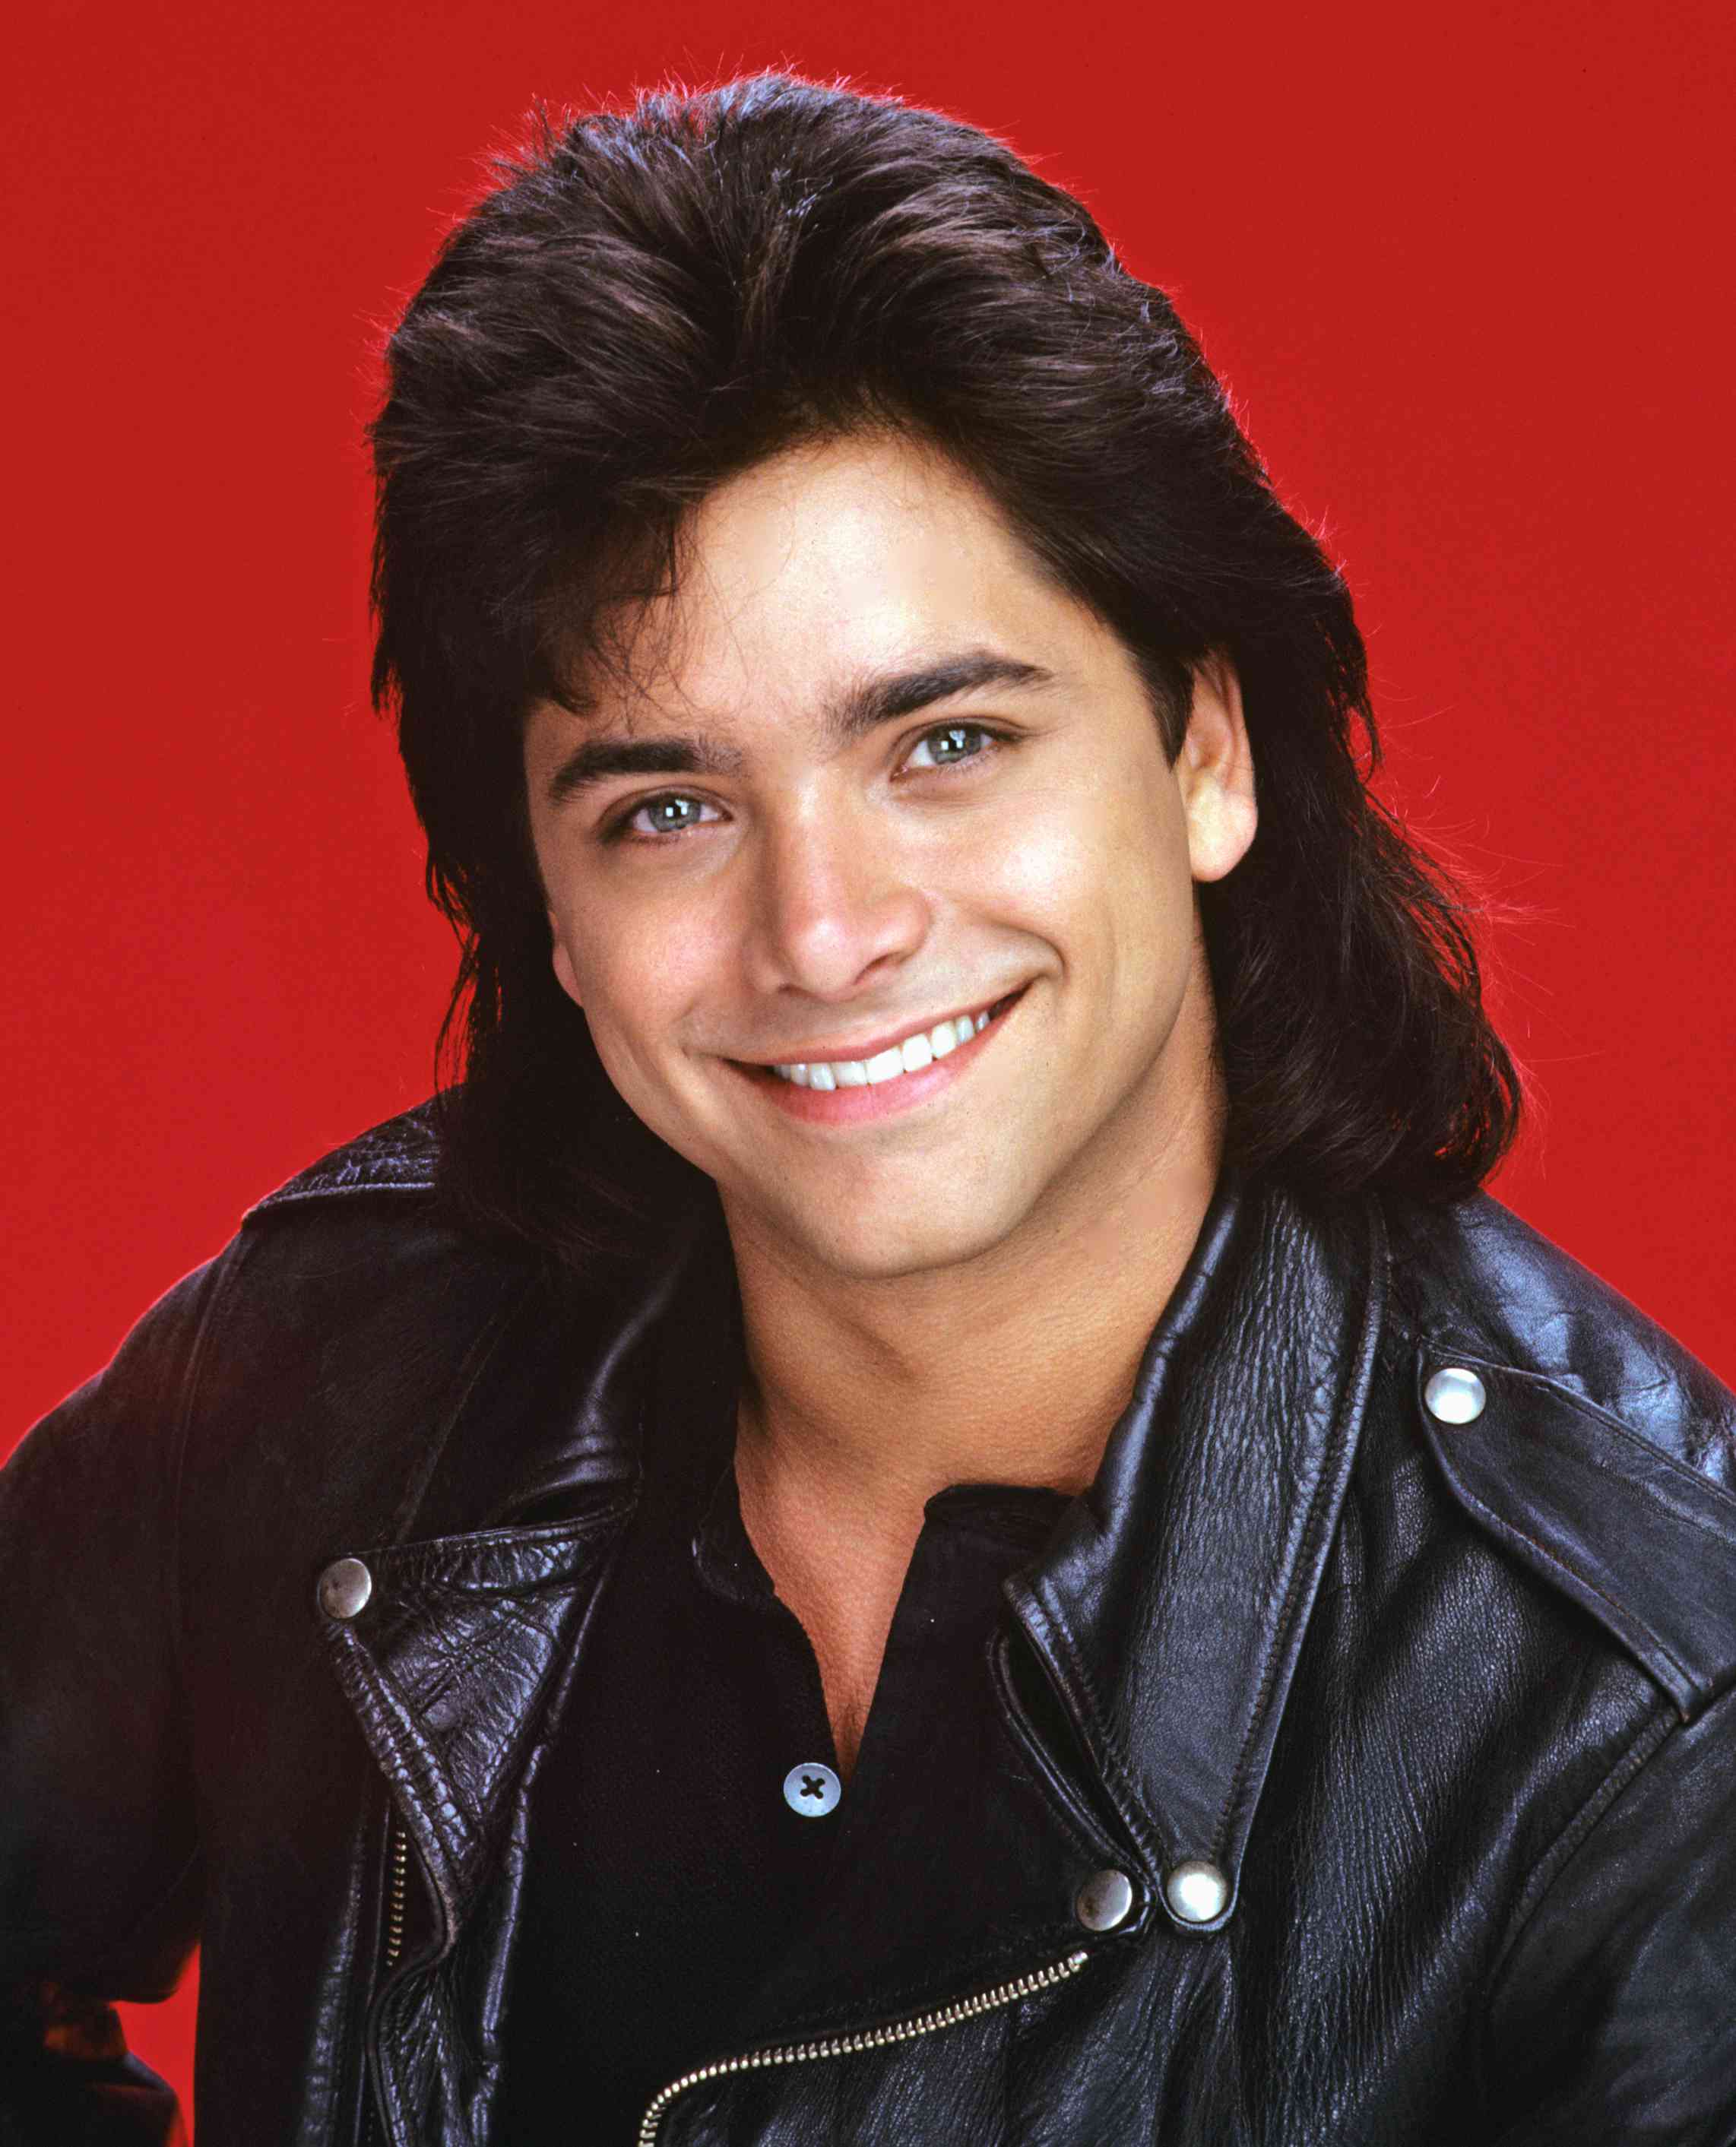 FULL HOUSE: John Stamos played Jesse Cochran (later changed to Katsopolis), who moved in with his widowed brother-in-law, Danny Tanner, to help raise nieces, D.J., Stephanie and Michelle